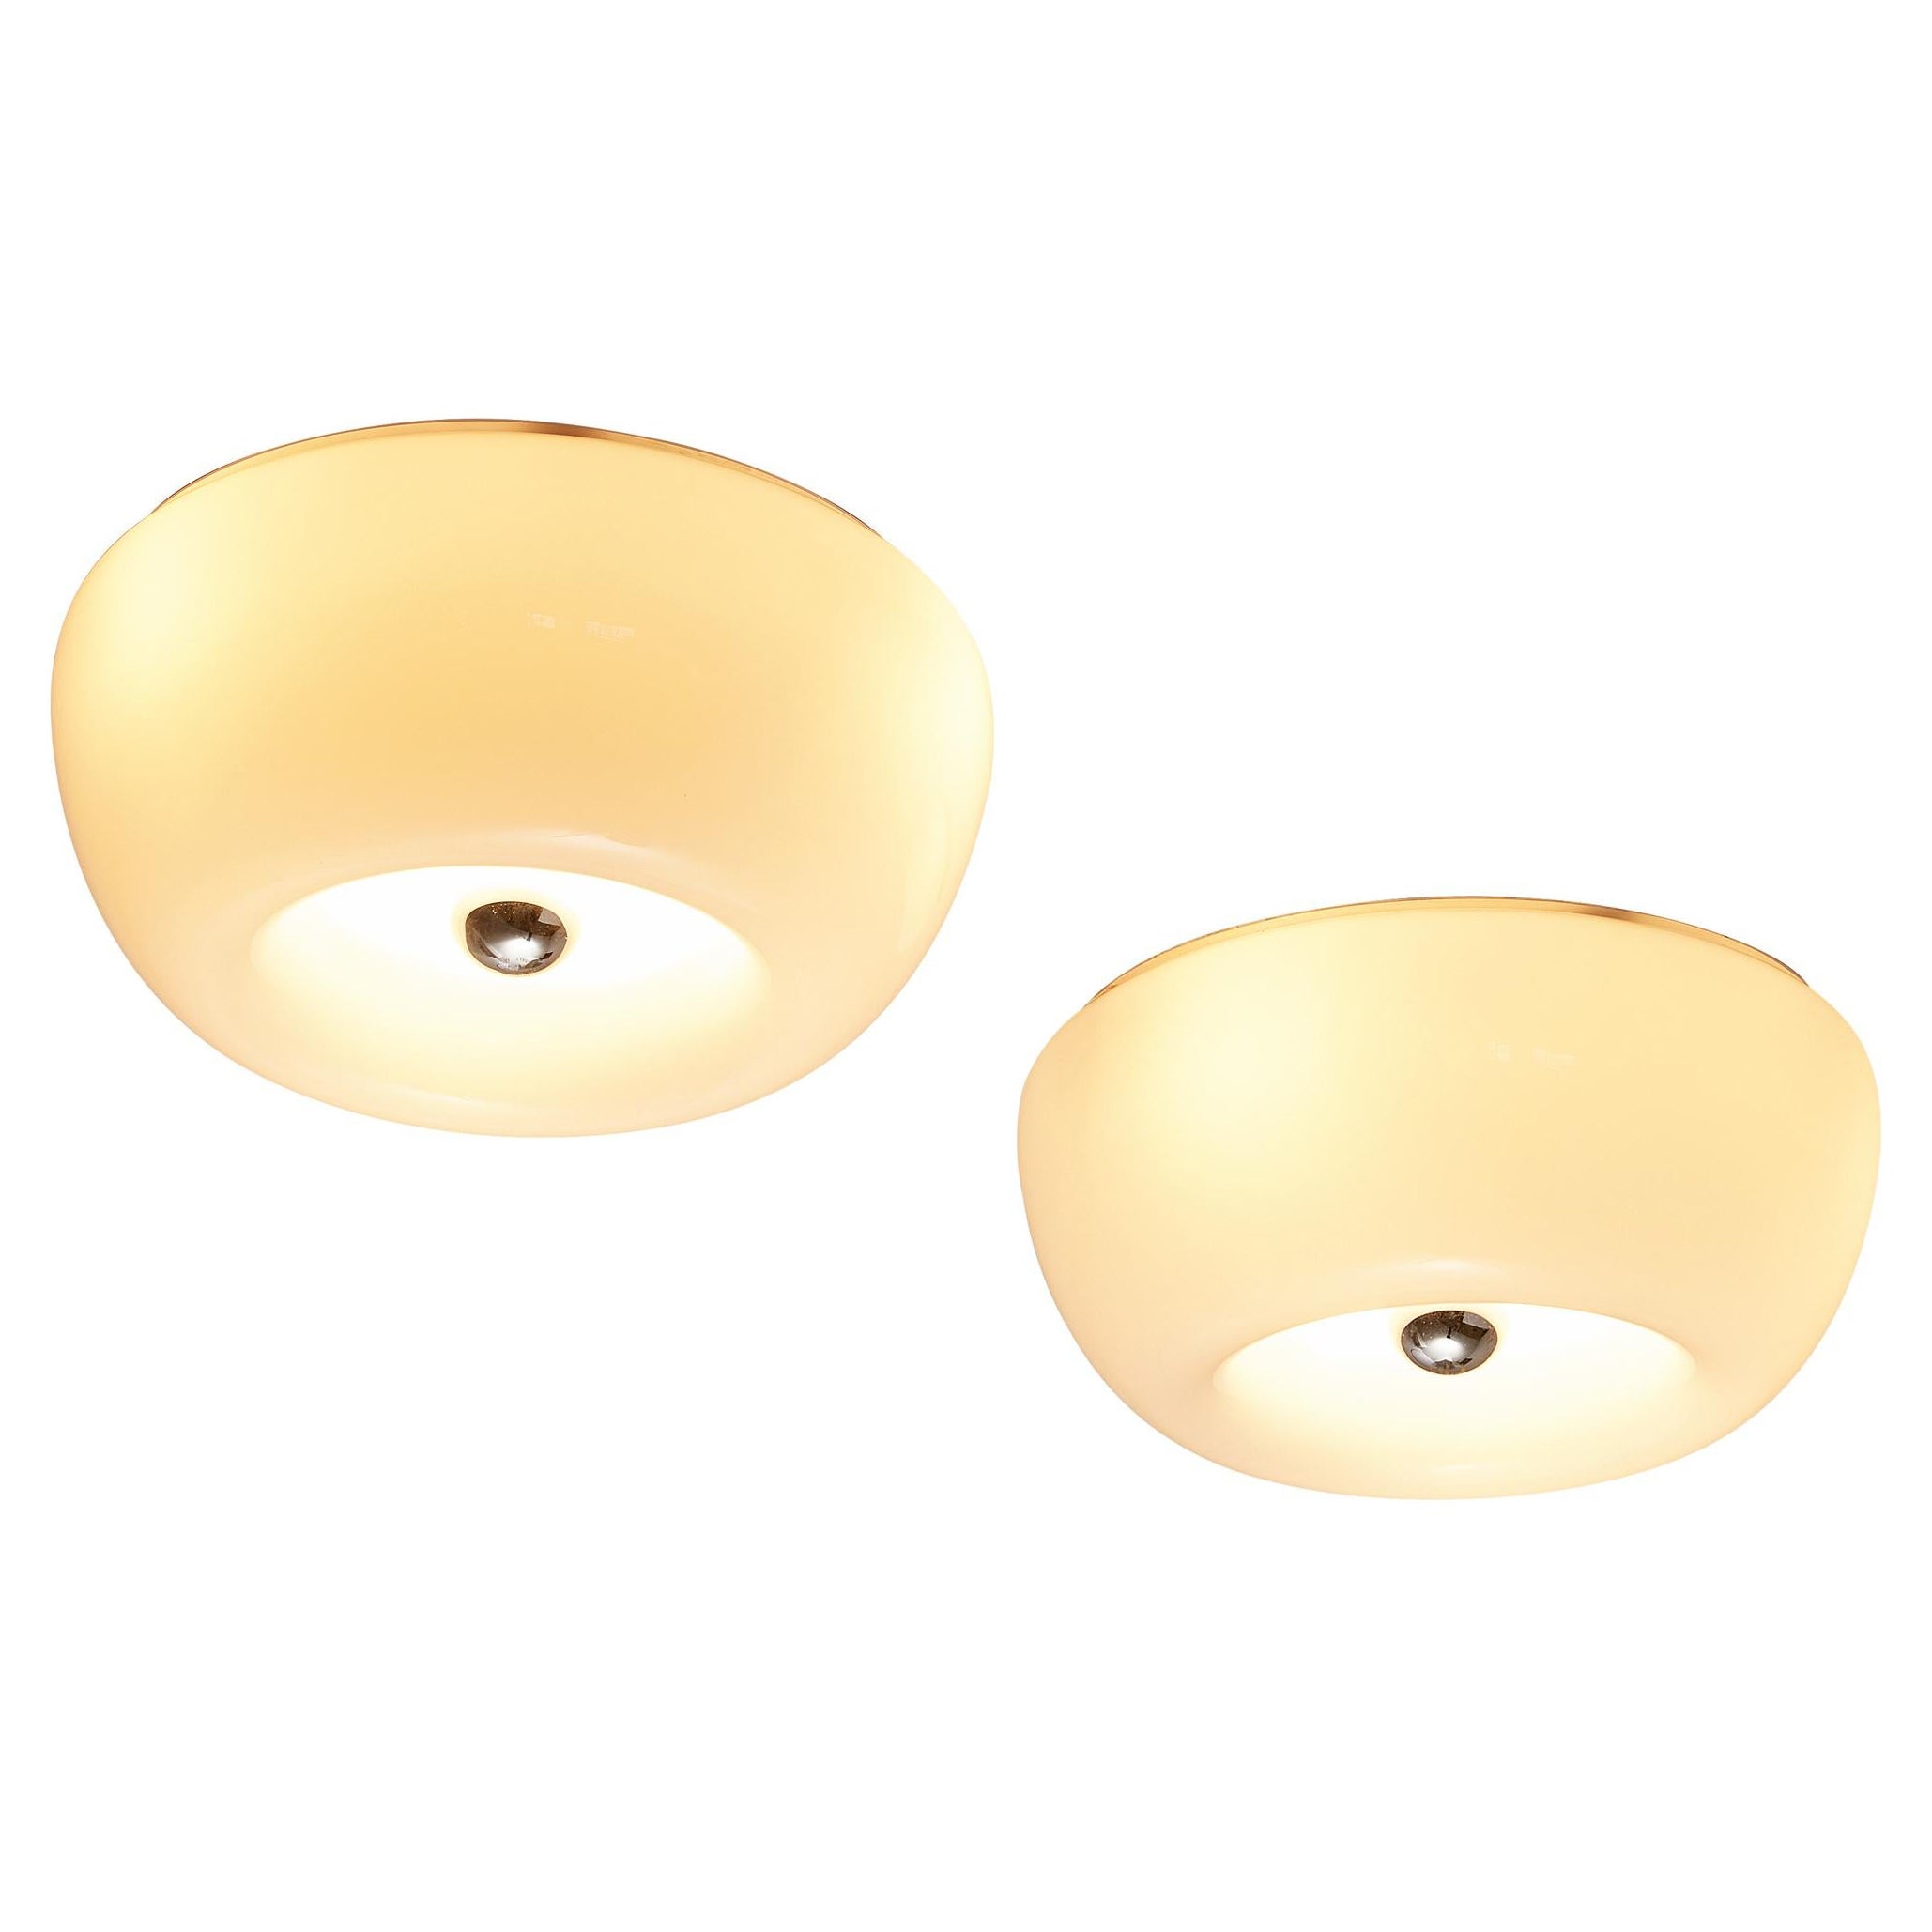 Achille and Pier Giacomo Castiglioni for Flos Pair of Pendants in Opaline Glass